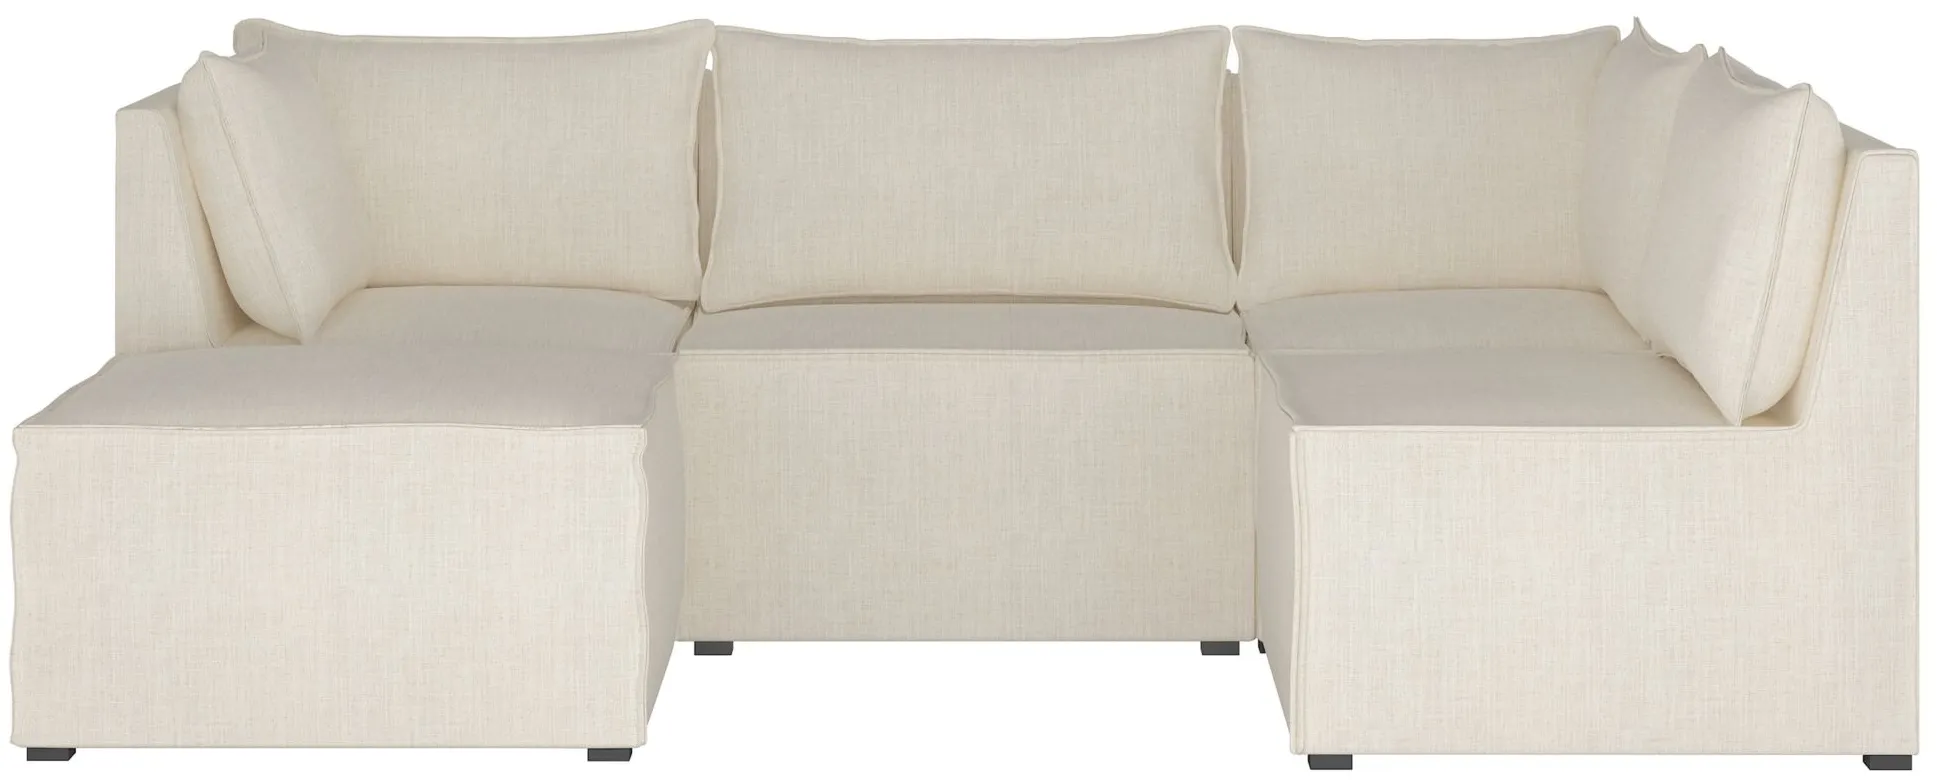 Stacy III 5-pc. Left Hand Facing Sectional Sofa in Linen Talc by Skyline